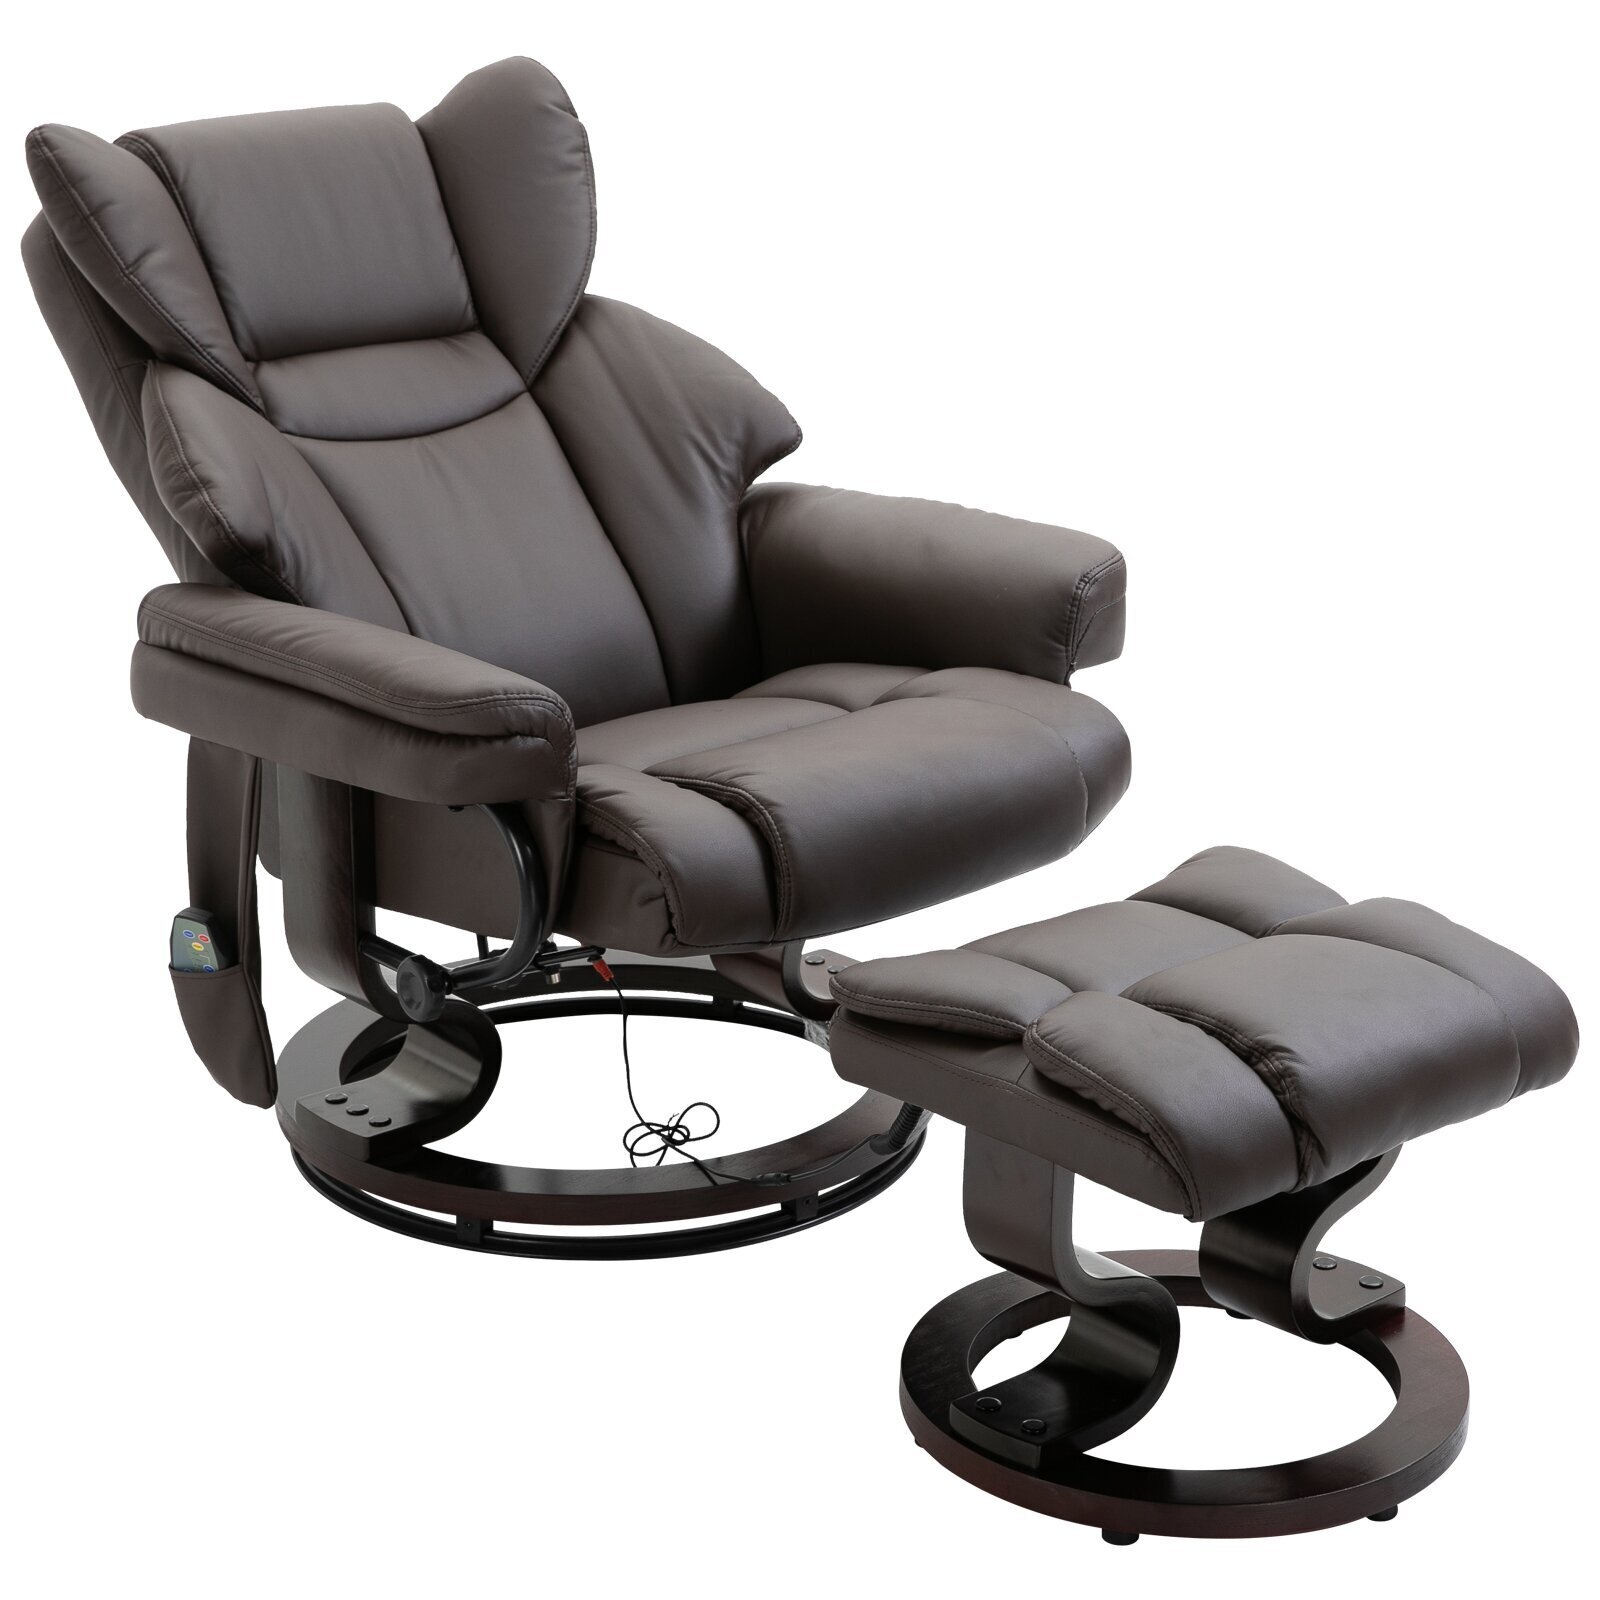 Large Recliner Chair with Ottoman